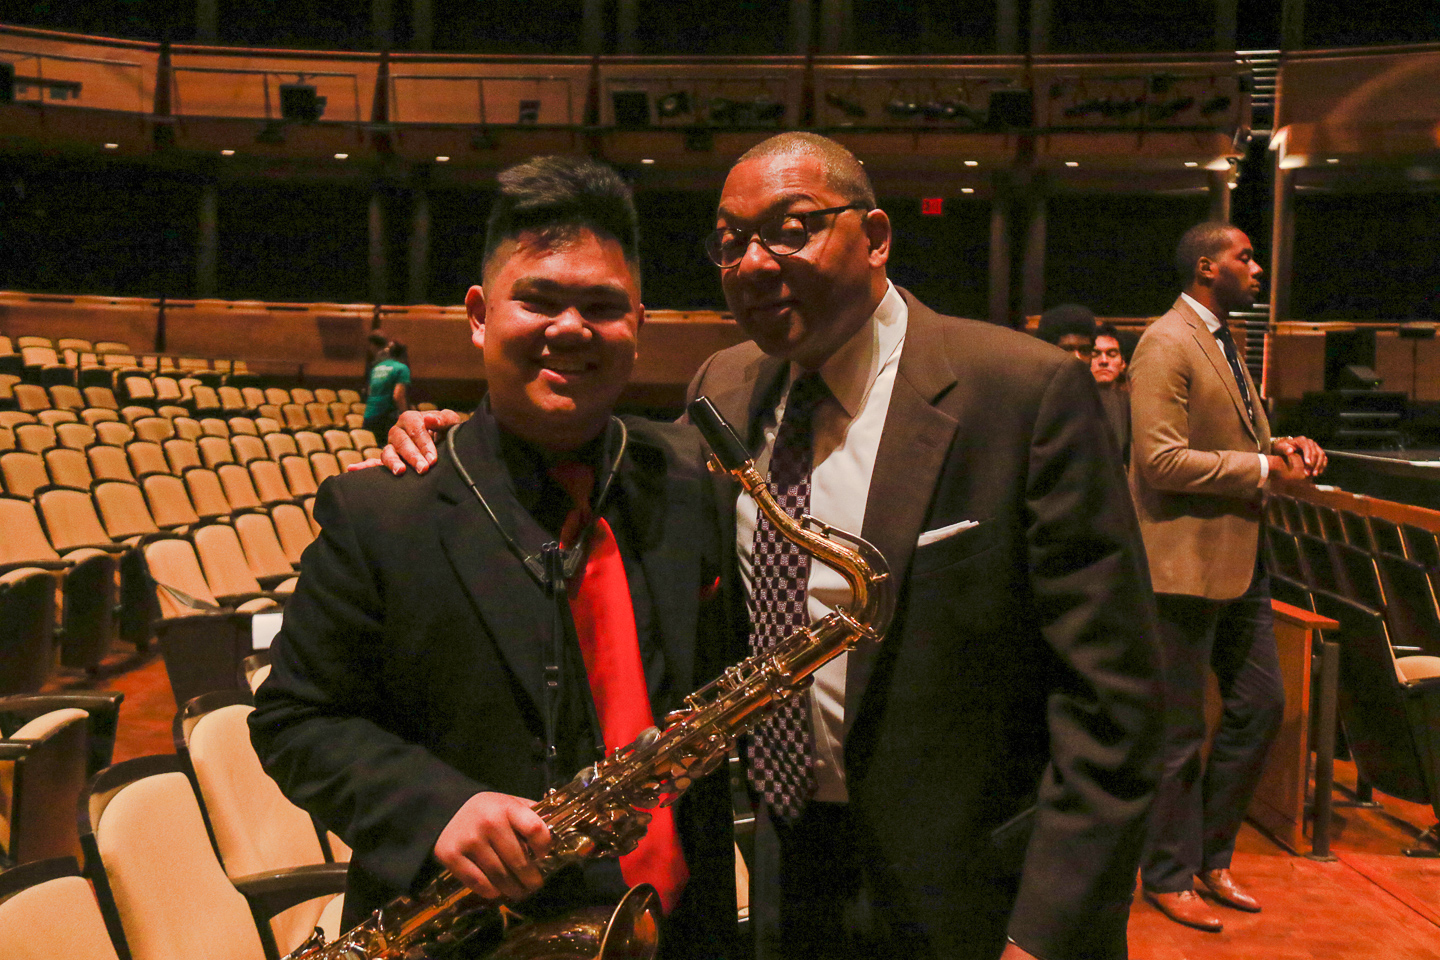 Senior Andrew Sumabat meets with Wynton Marsalis after Terraces performance in Rose Theater. Sumabat briefly discussed his solos with Marsalis before the shot was taken.